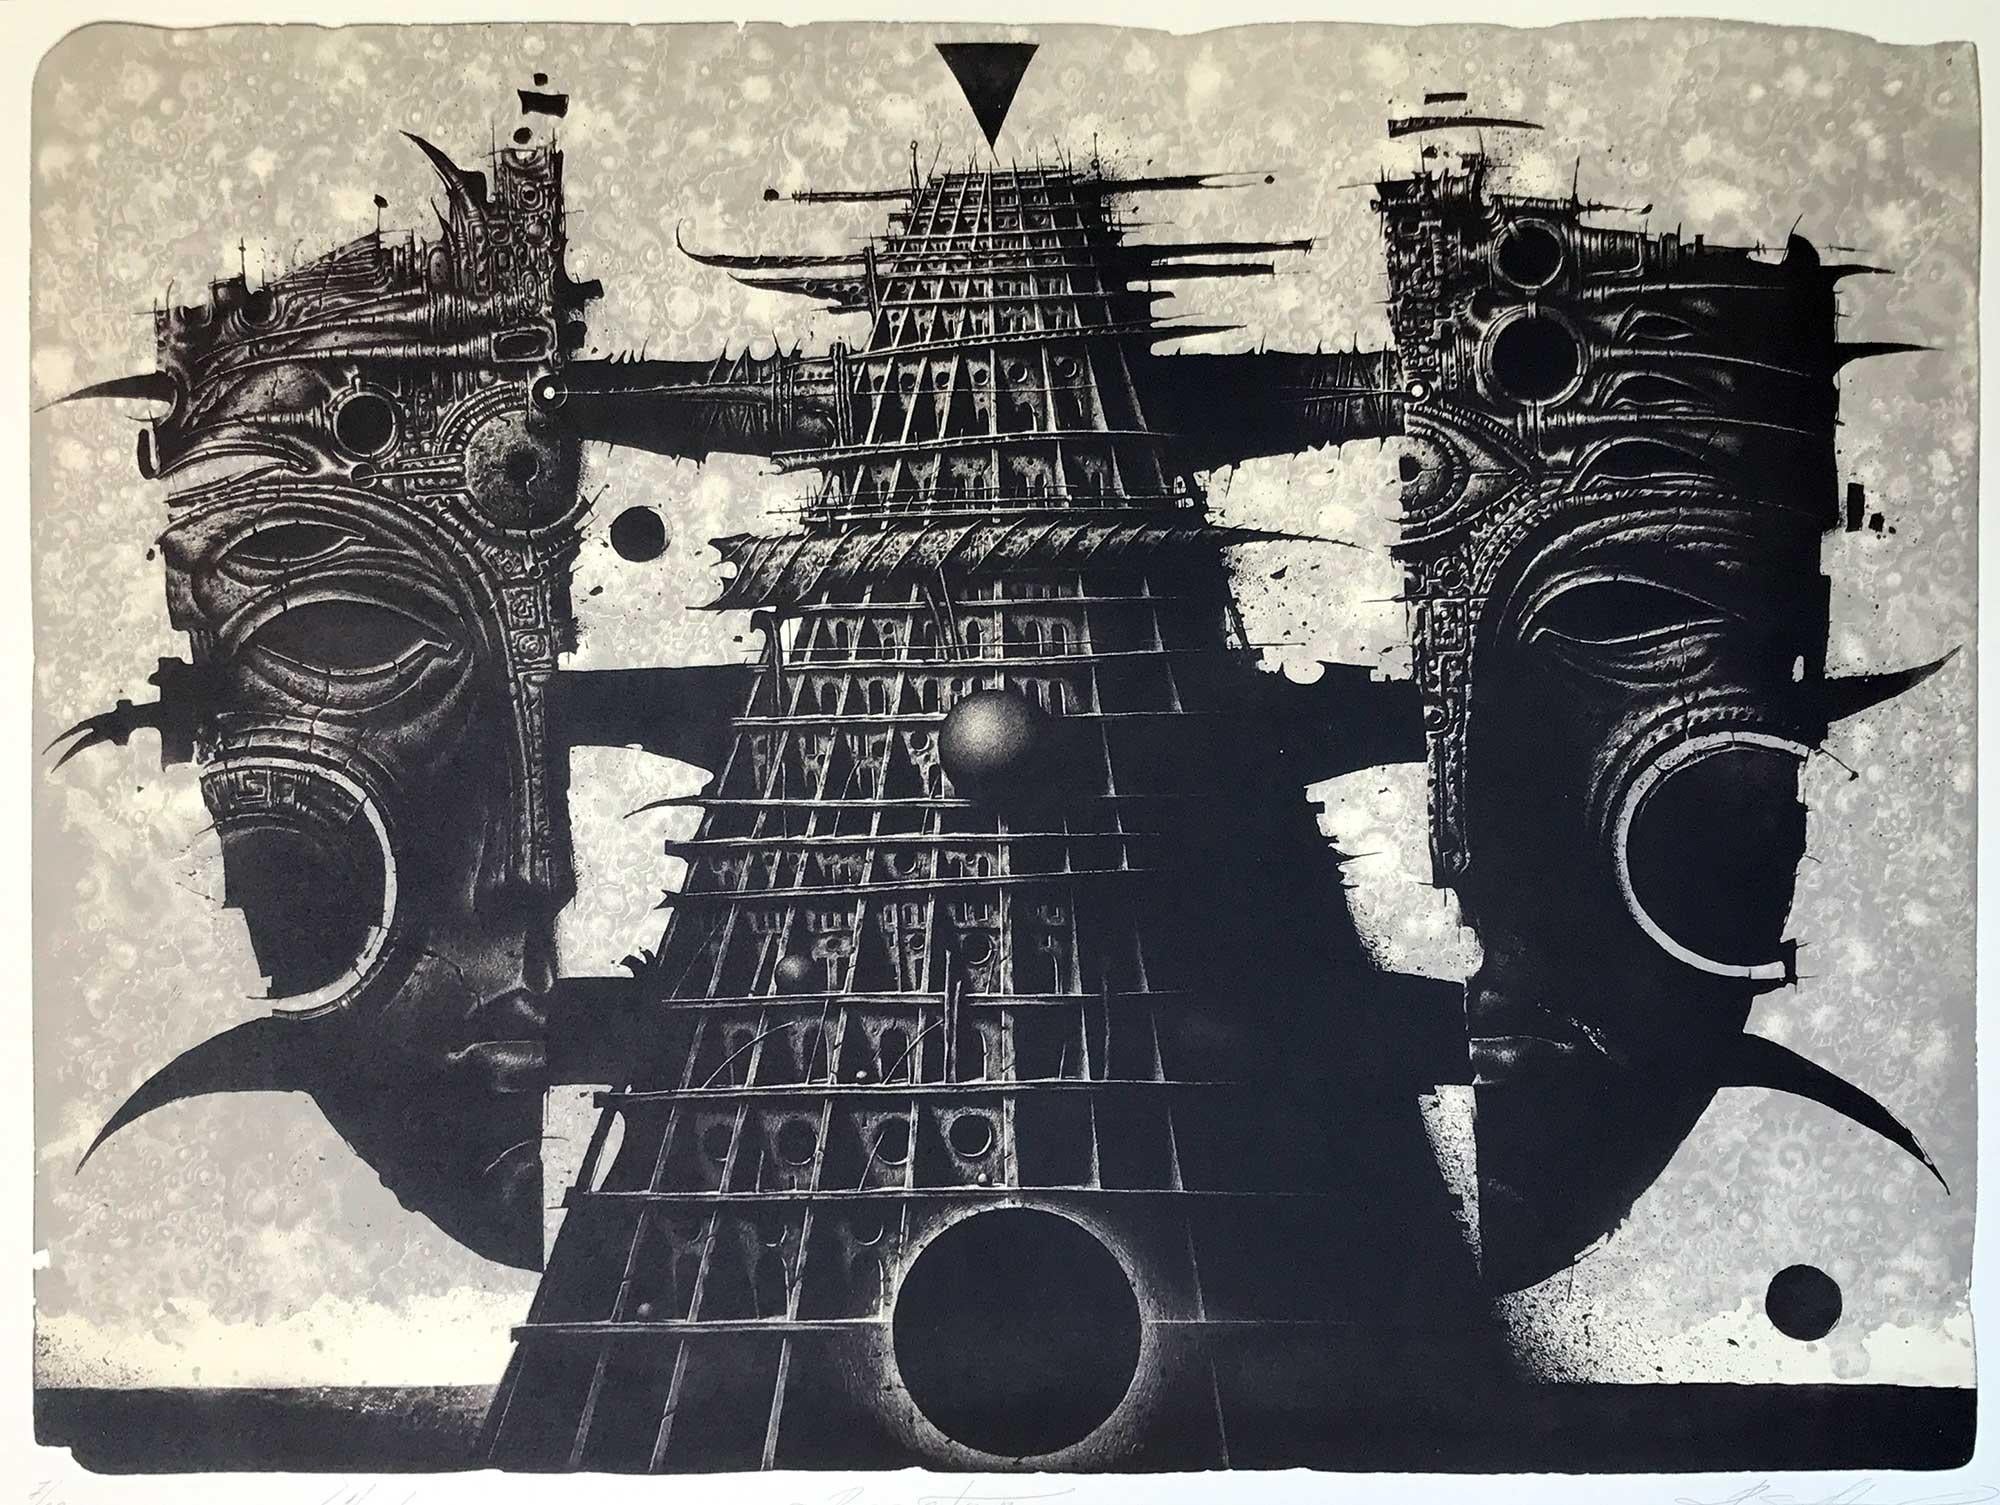 Signed, titled and numbered in pencil, from the edition of 30. This is one of a group of prints he completed during a residency in China, with a surreal or science fiction flavor

Using traditional stone lithography, Sustov creates prints that mix